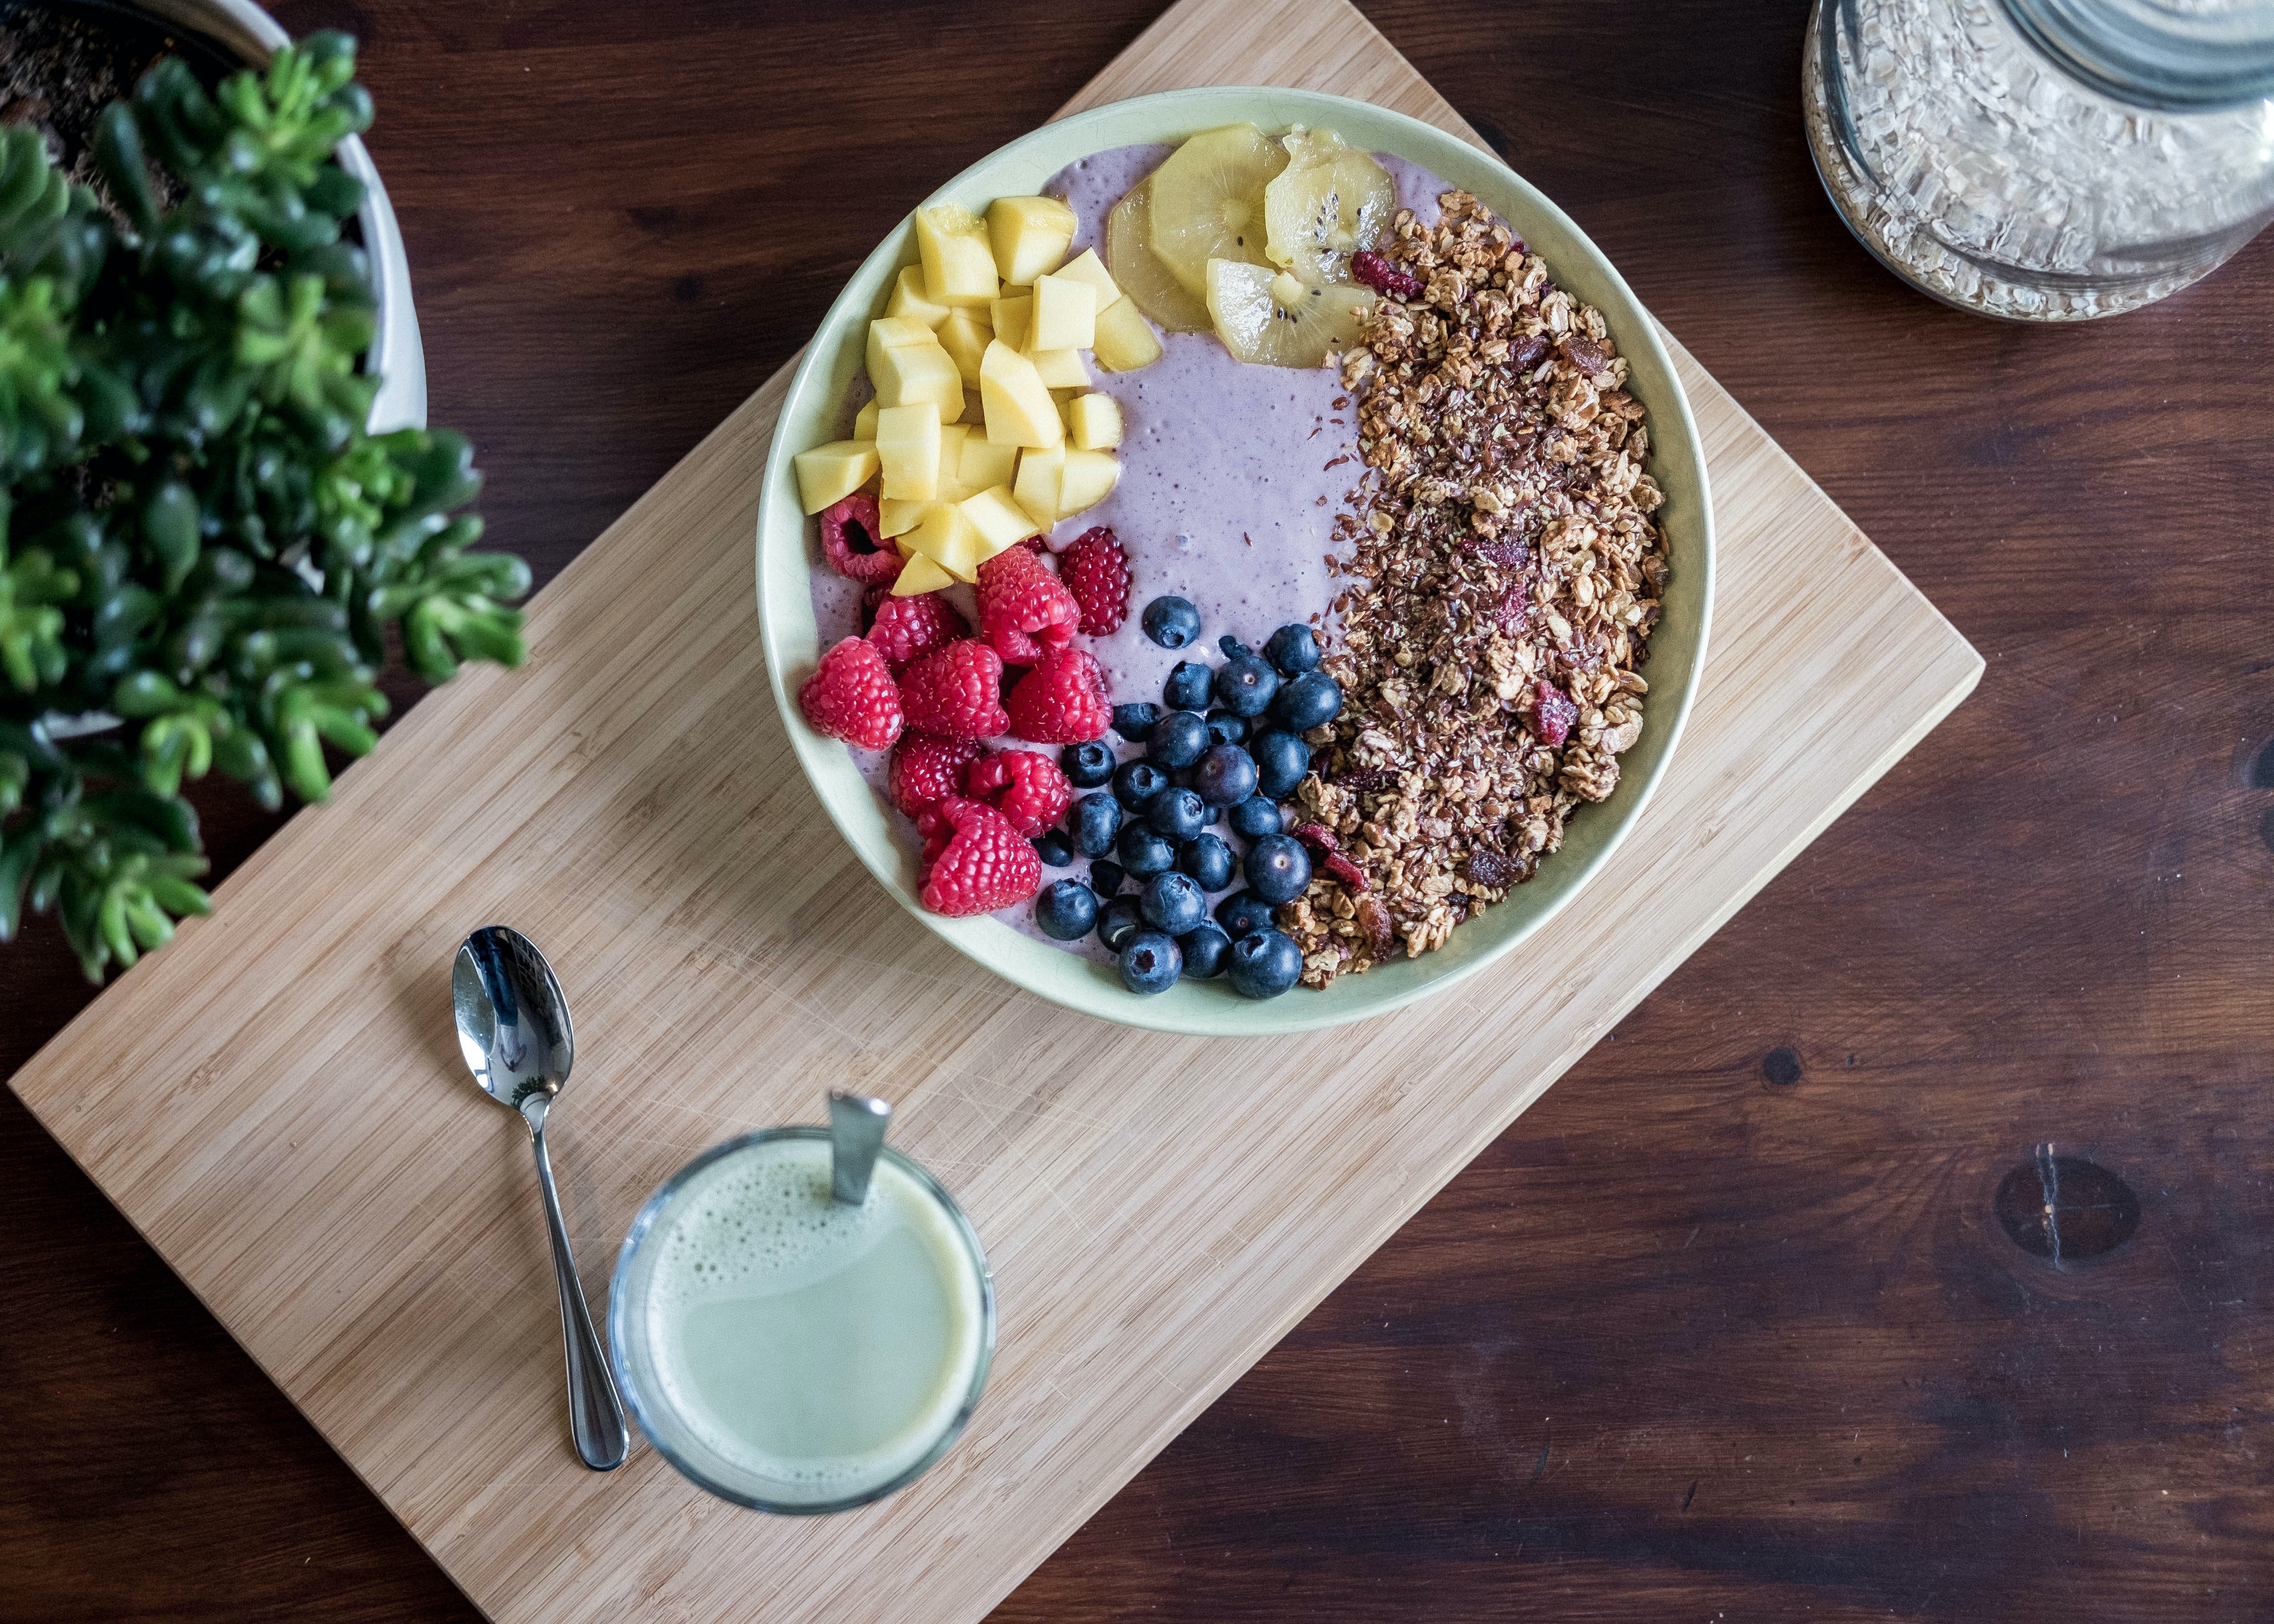 Healthy Smoothie Bowl photo by Jannis Brandt